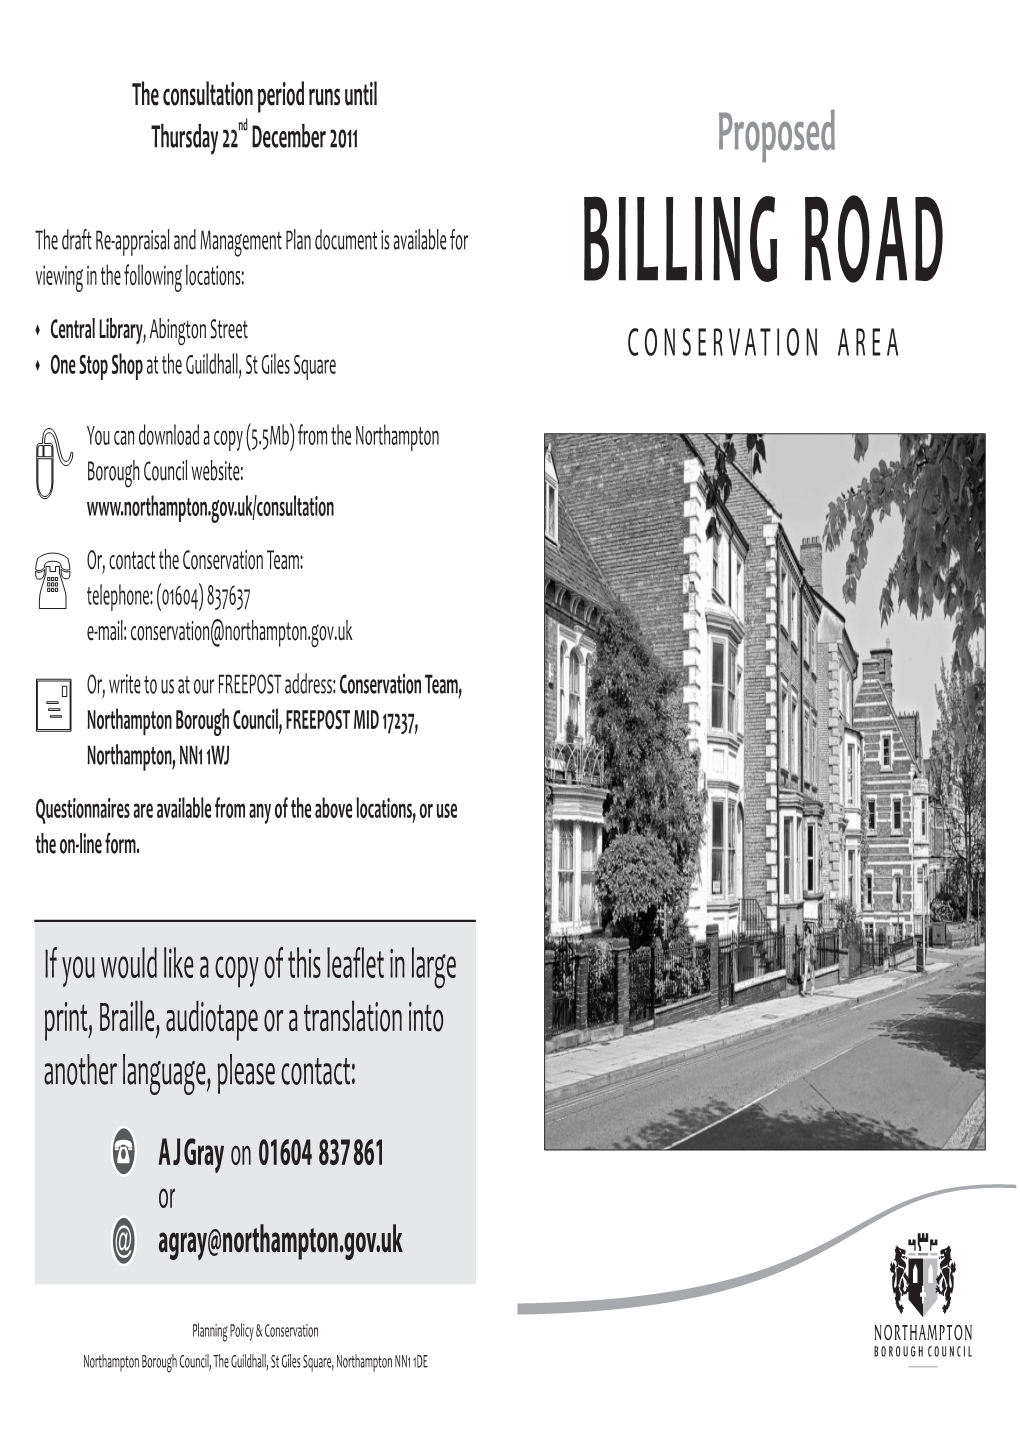 BILLING ROAD 6 Central Library, Abington Street 6 One Stop Shop at the Guildhall, St Giles Square